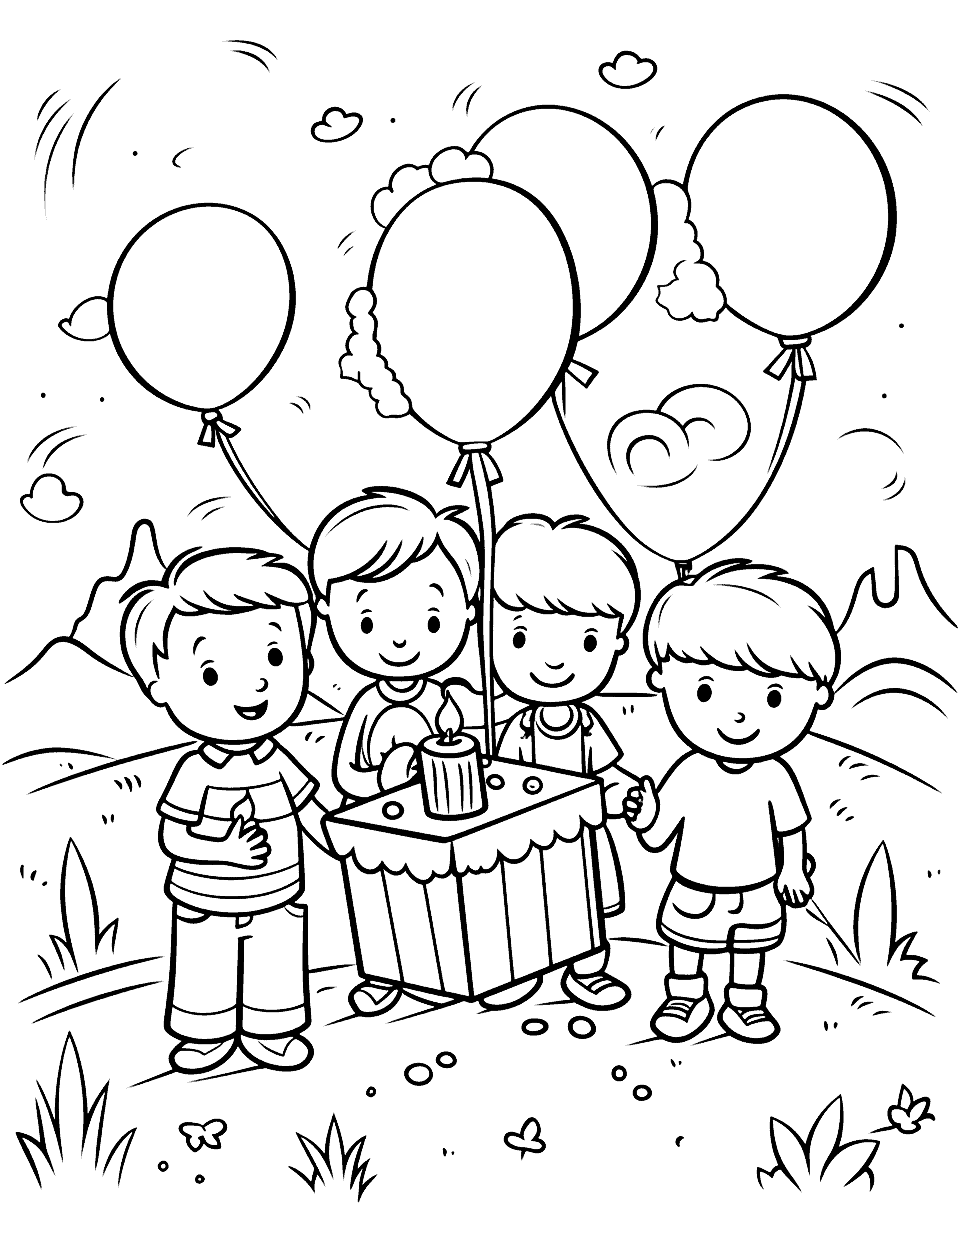 Outdoor Birthday Happy Coloring Page - A group of kids celebrating a birthday party outside at the park.